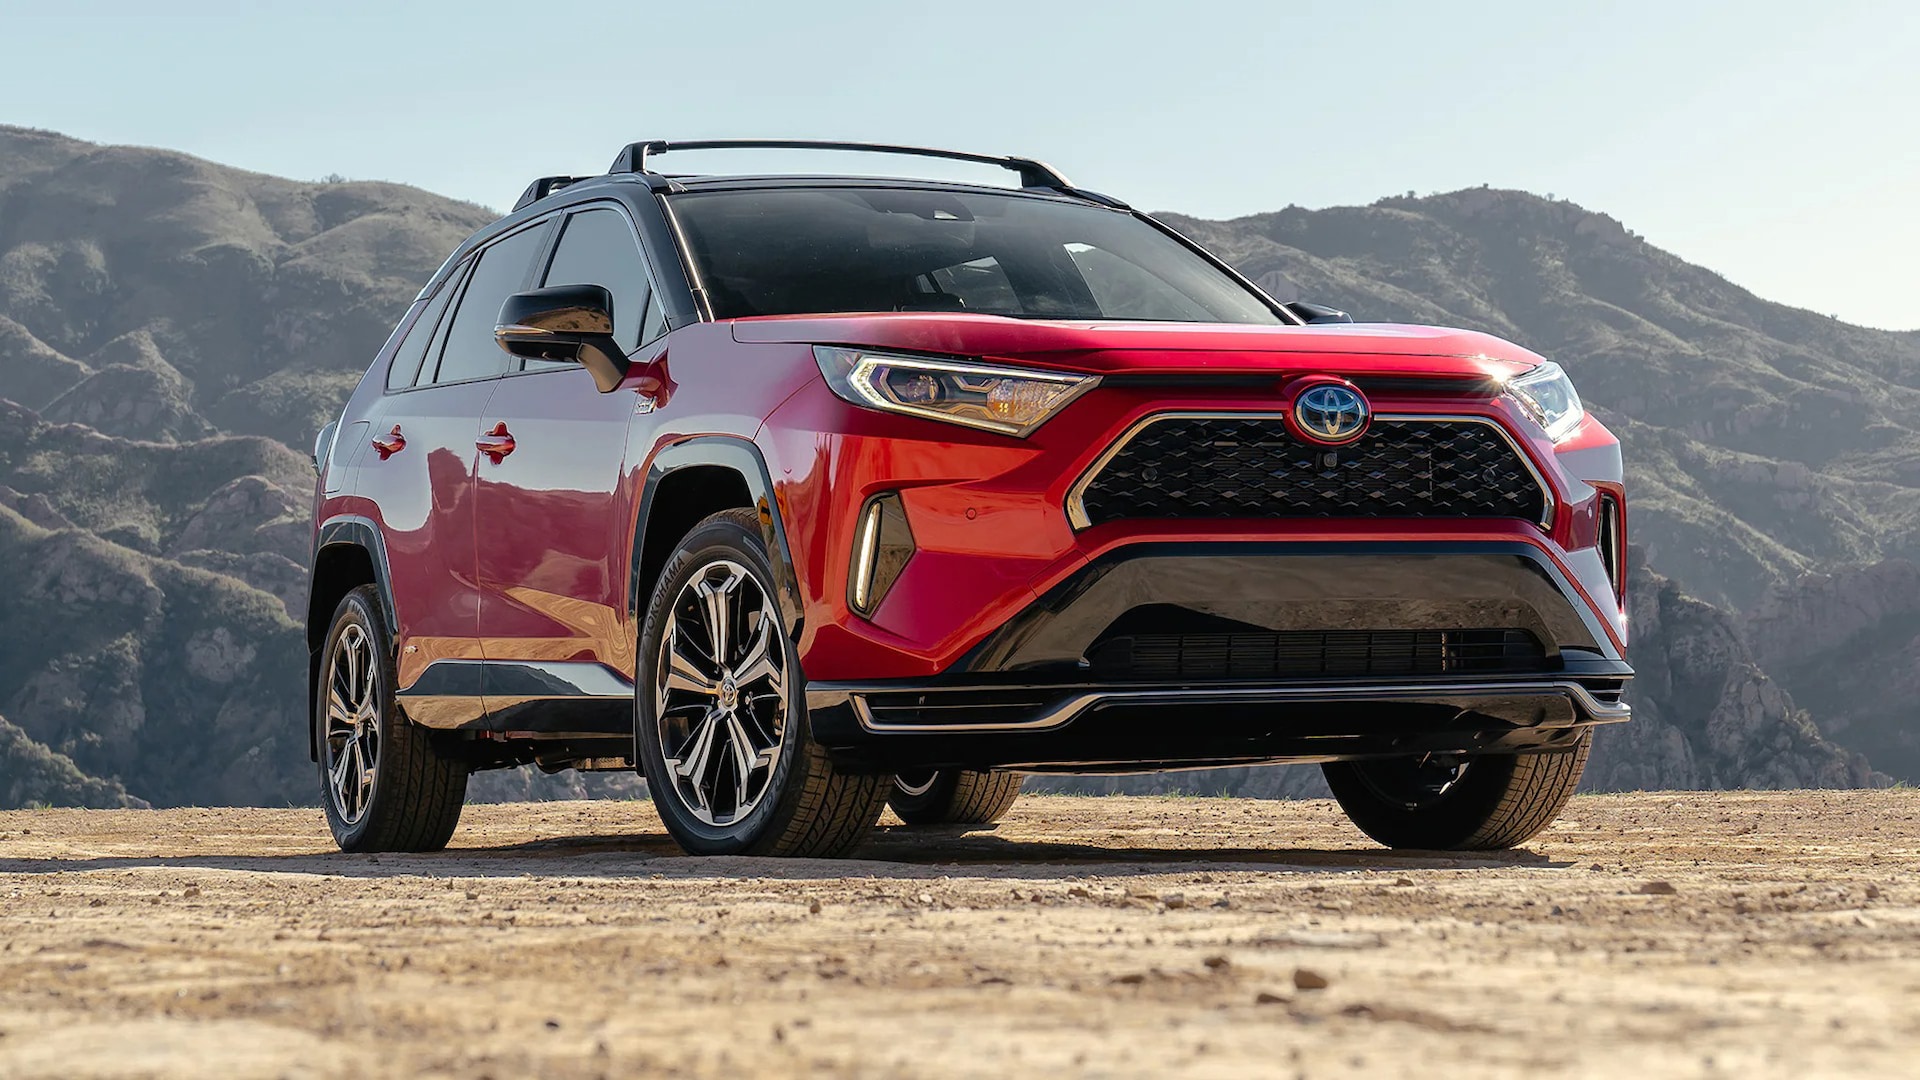 2022 Toyota RAV4 Prime Prices, Reviews, and Photos - MotorTrend